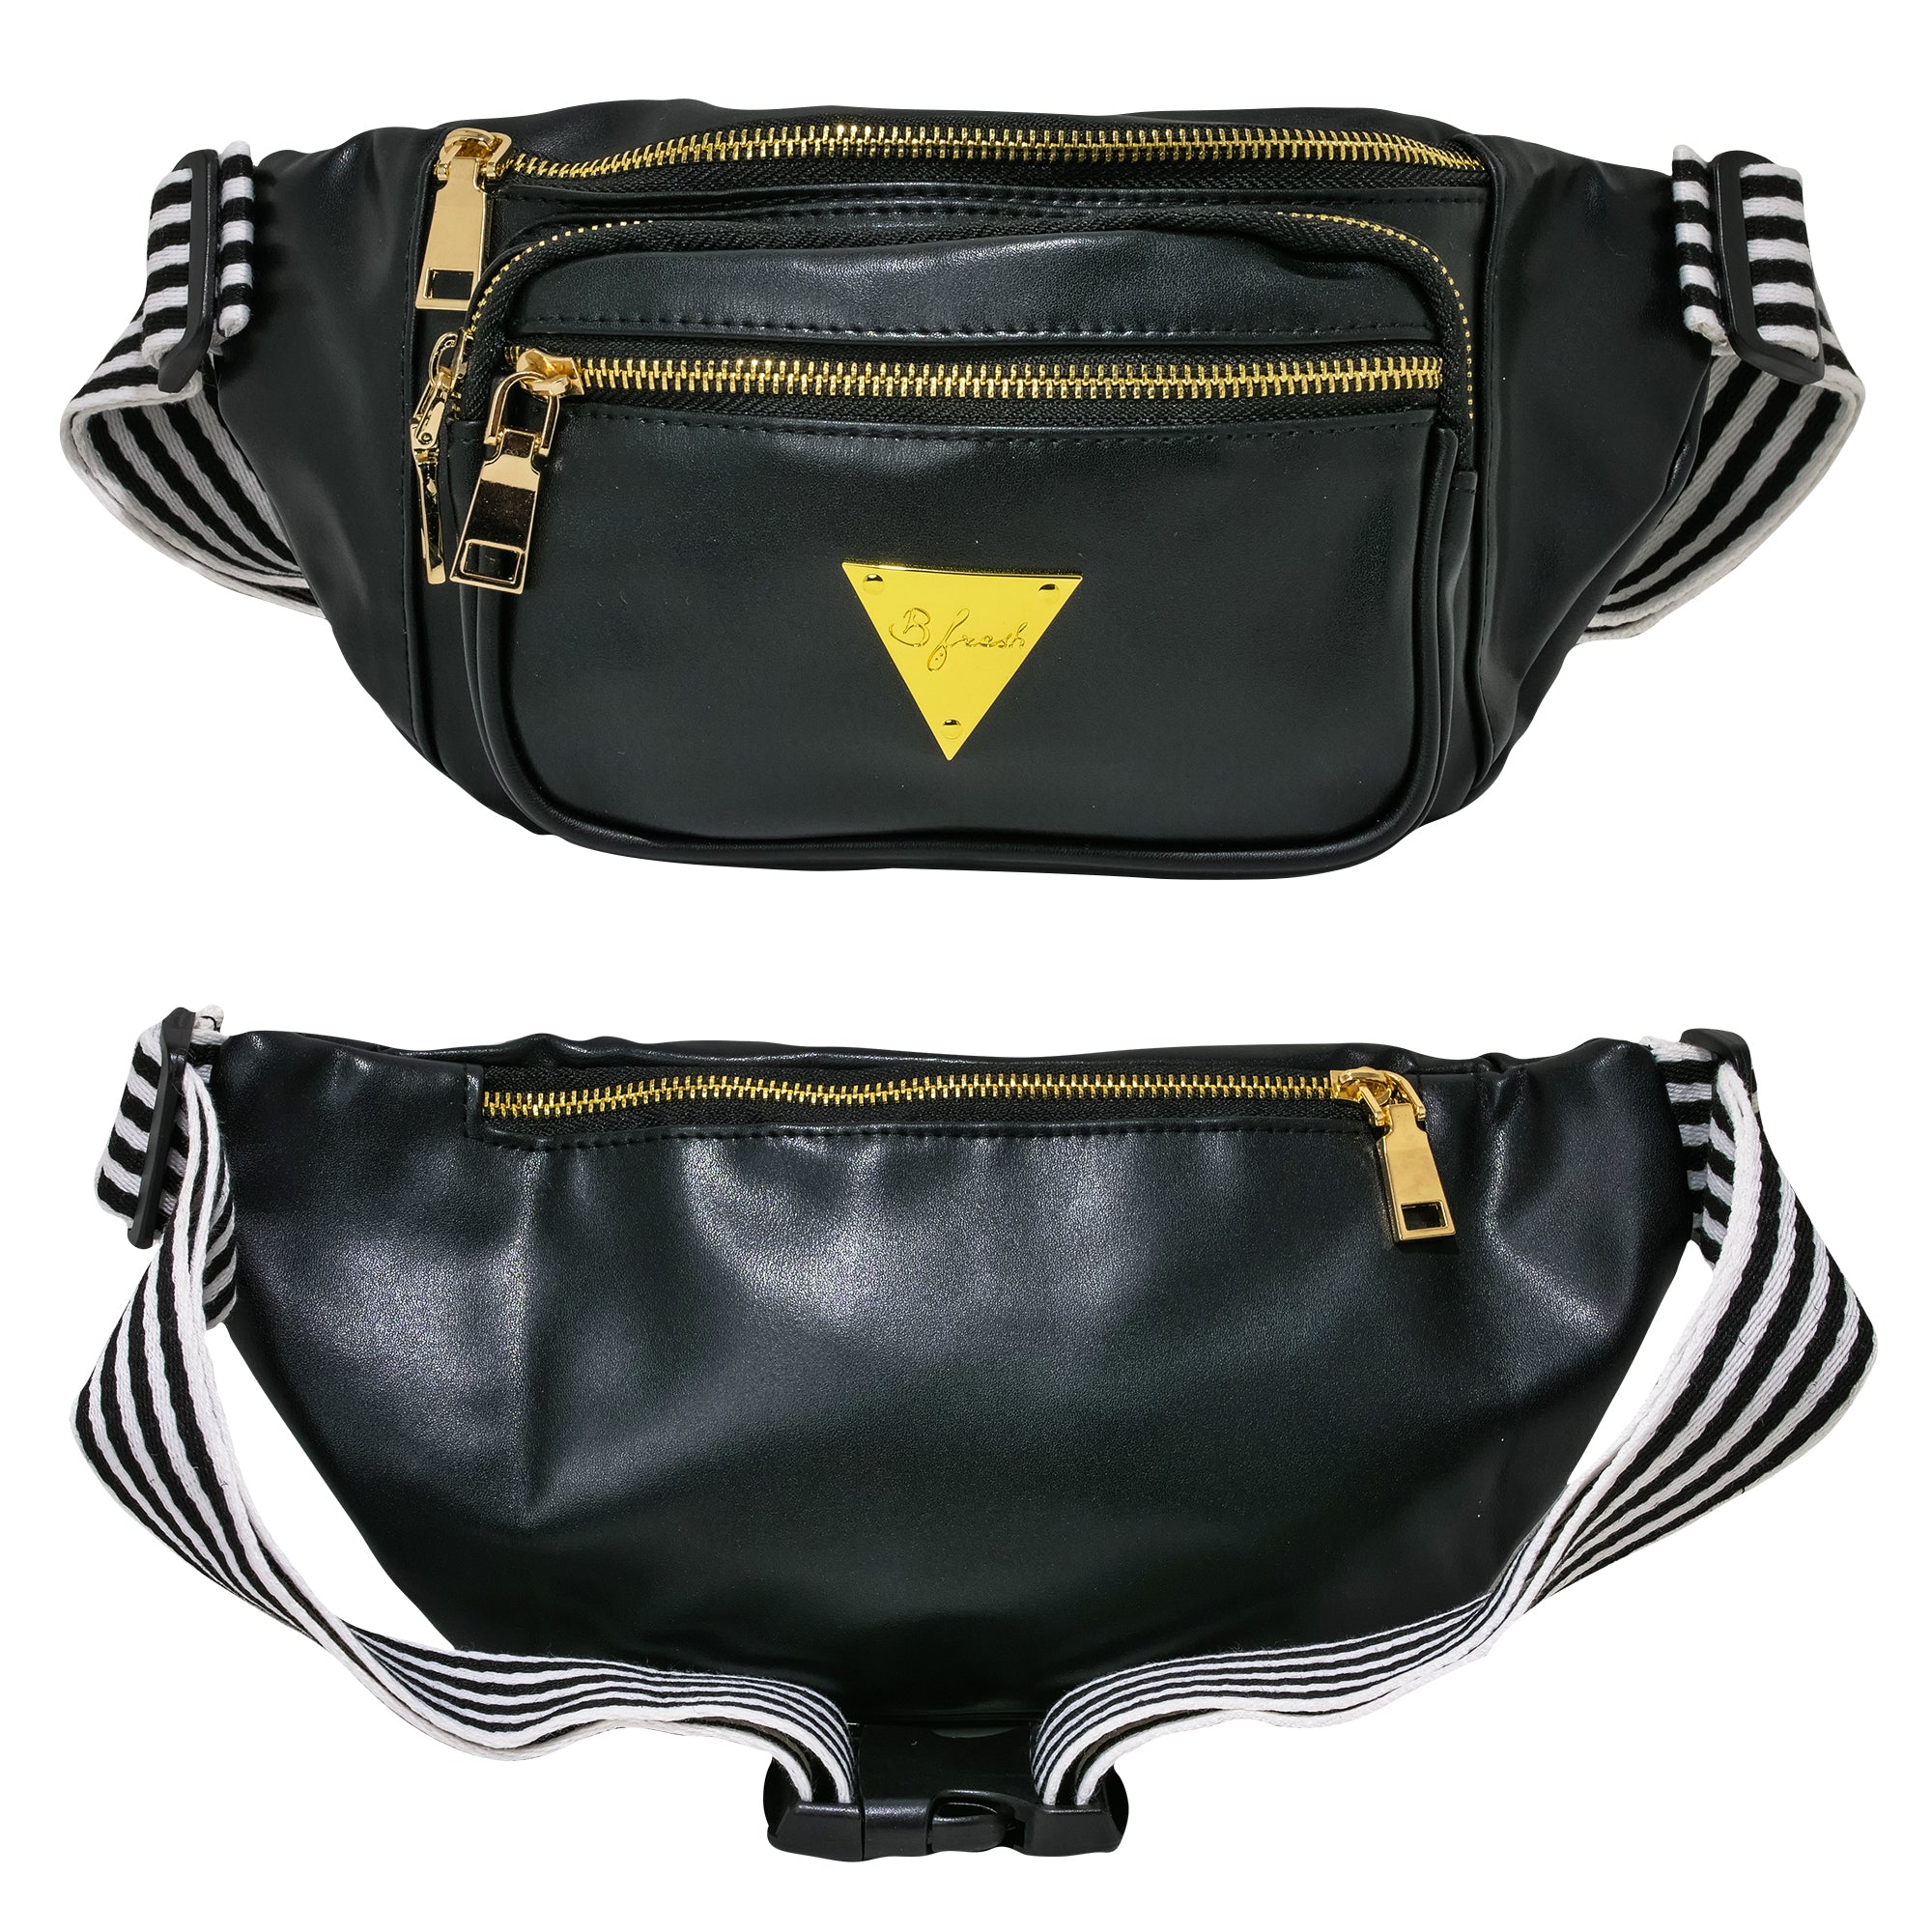 The Escobar Fanny Pack Bum Bag - Faux black leather retro fanny pack with gold zippers and white and black stripped belt. 4 pocket vintage fanny pack 80s design. B Fresh Gear